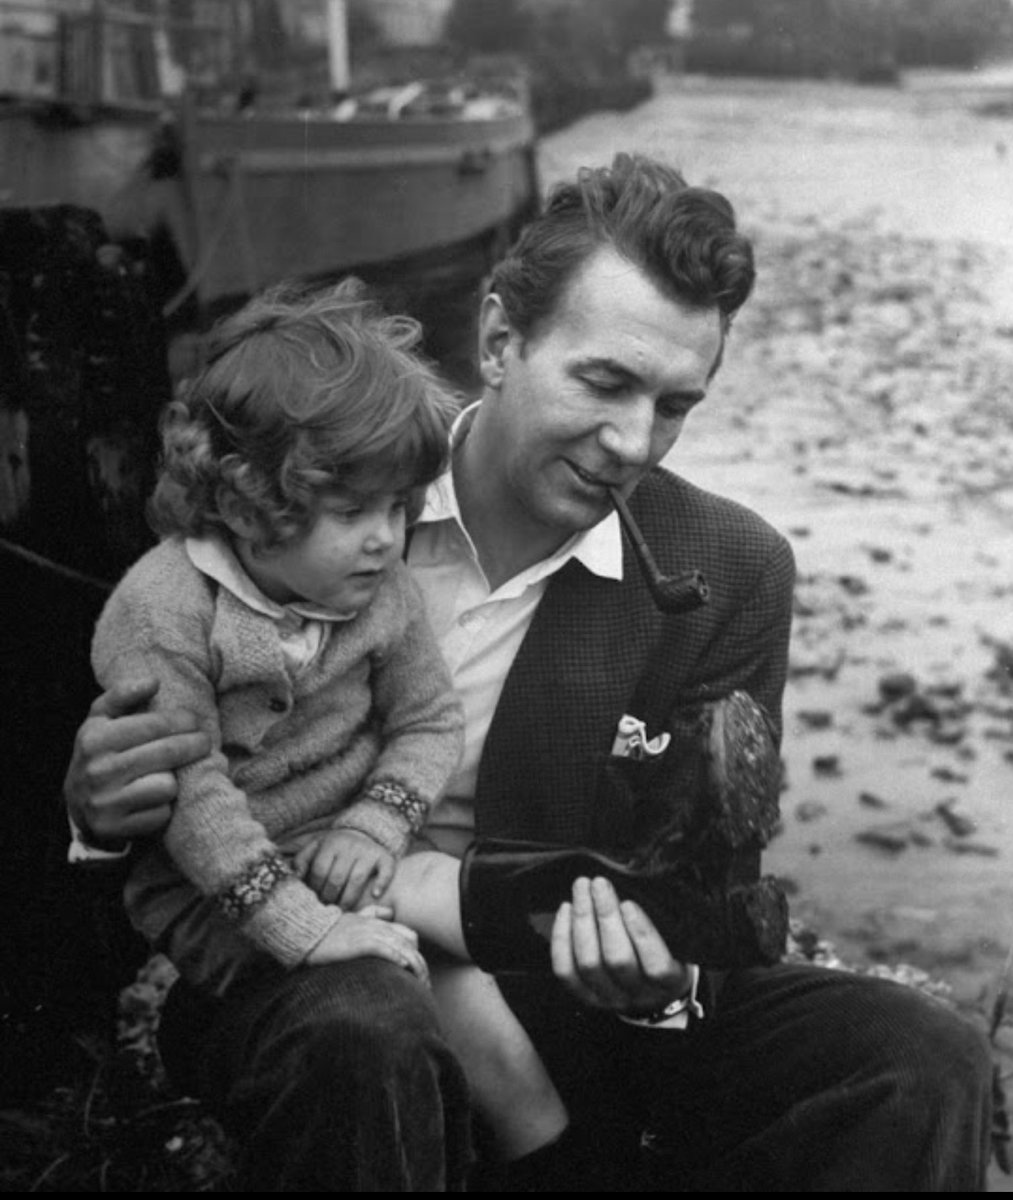 #HappyFathersDay!

Famous Dads … Famous Children

1) Donald & #KieferSutherland
2) #MichaelRedgrave & Lynn, 1946
3) #HenryFonda with Jane and Peter

#fathersday #dads #father #fathers #pere #donaldsutherland #lynnredgrave #janefonda #peterfonda #vader #papa #daddy #poppa